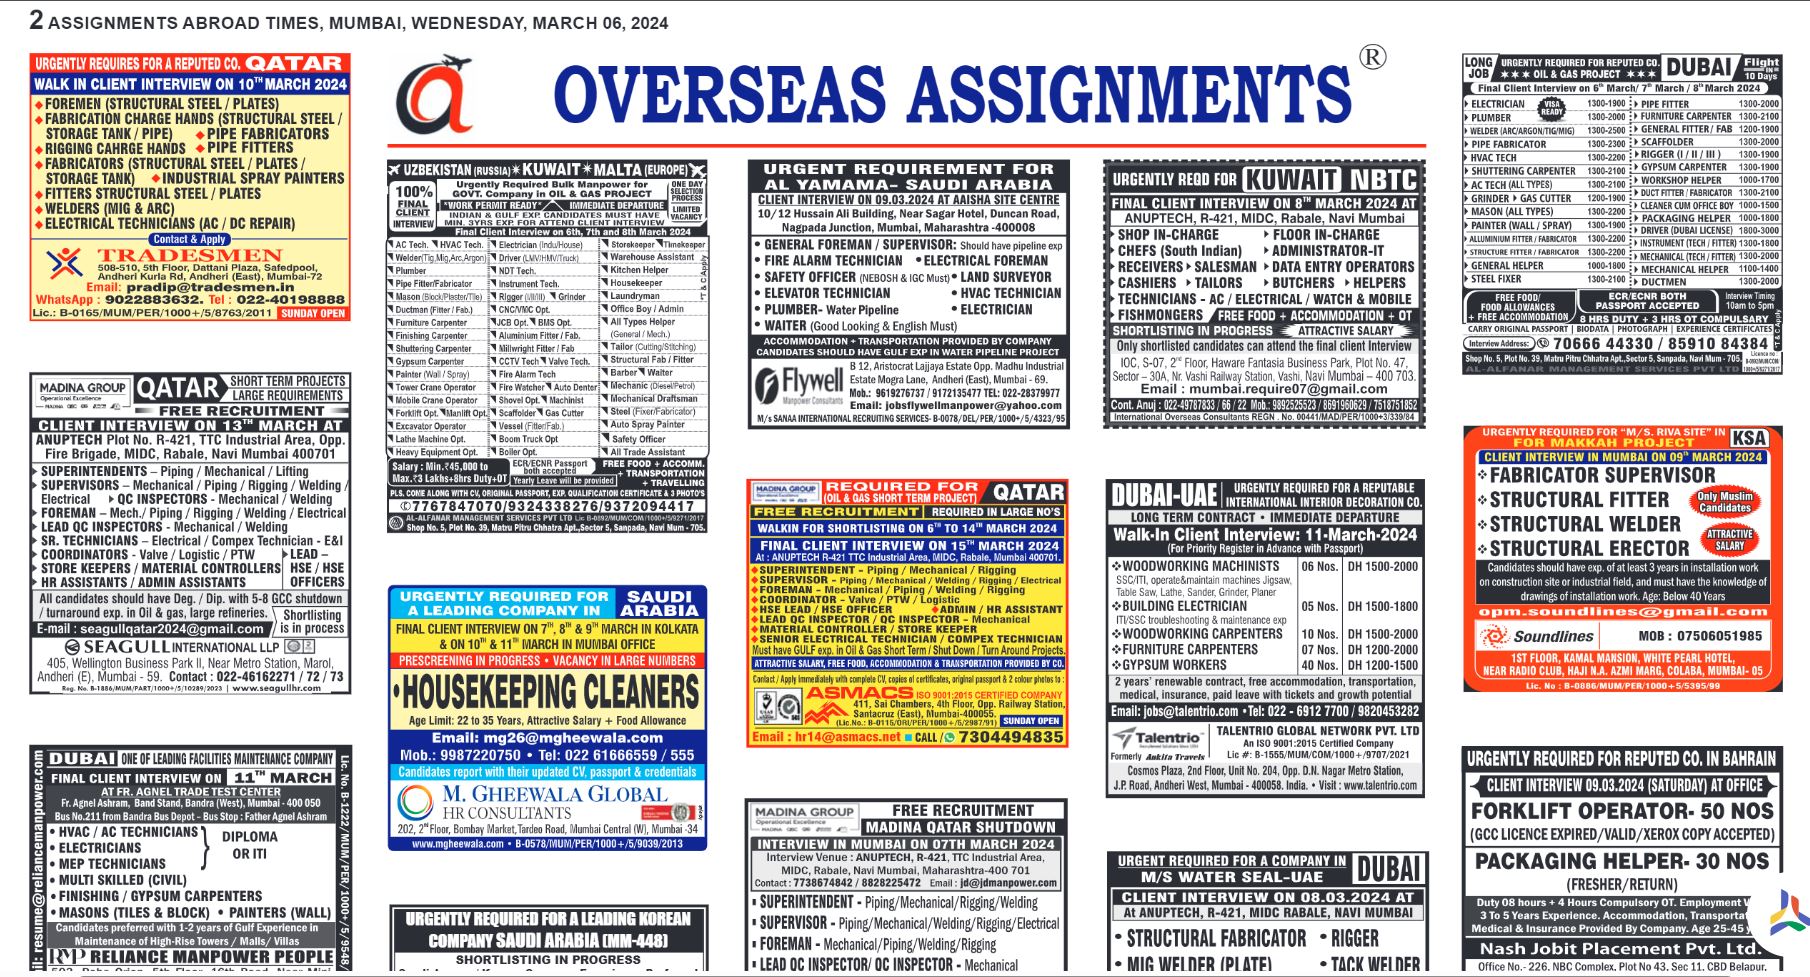 assignment abroad times 06th March 2024